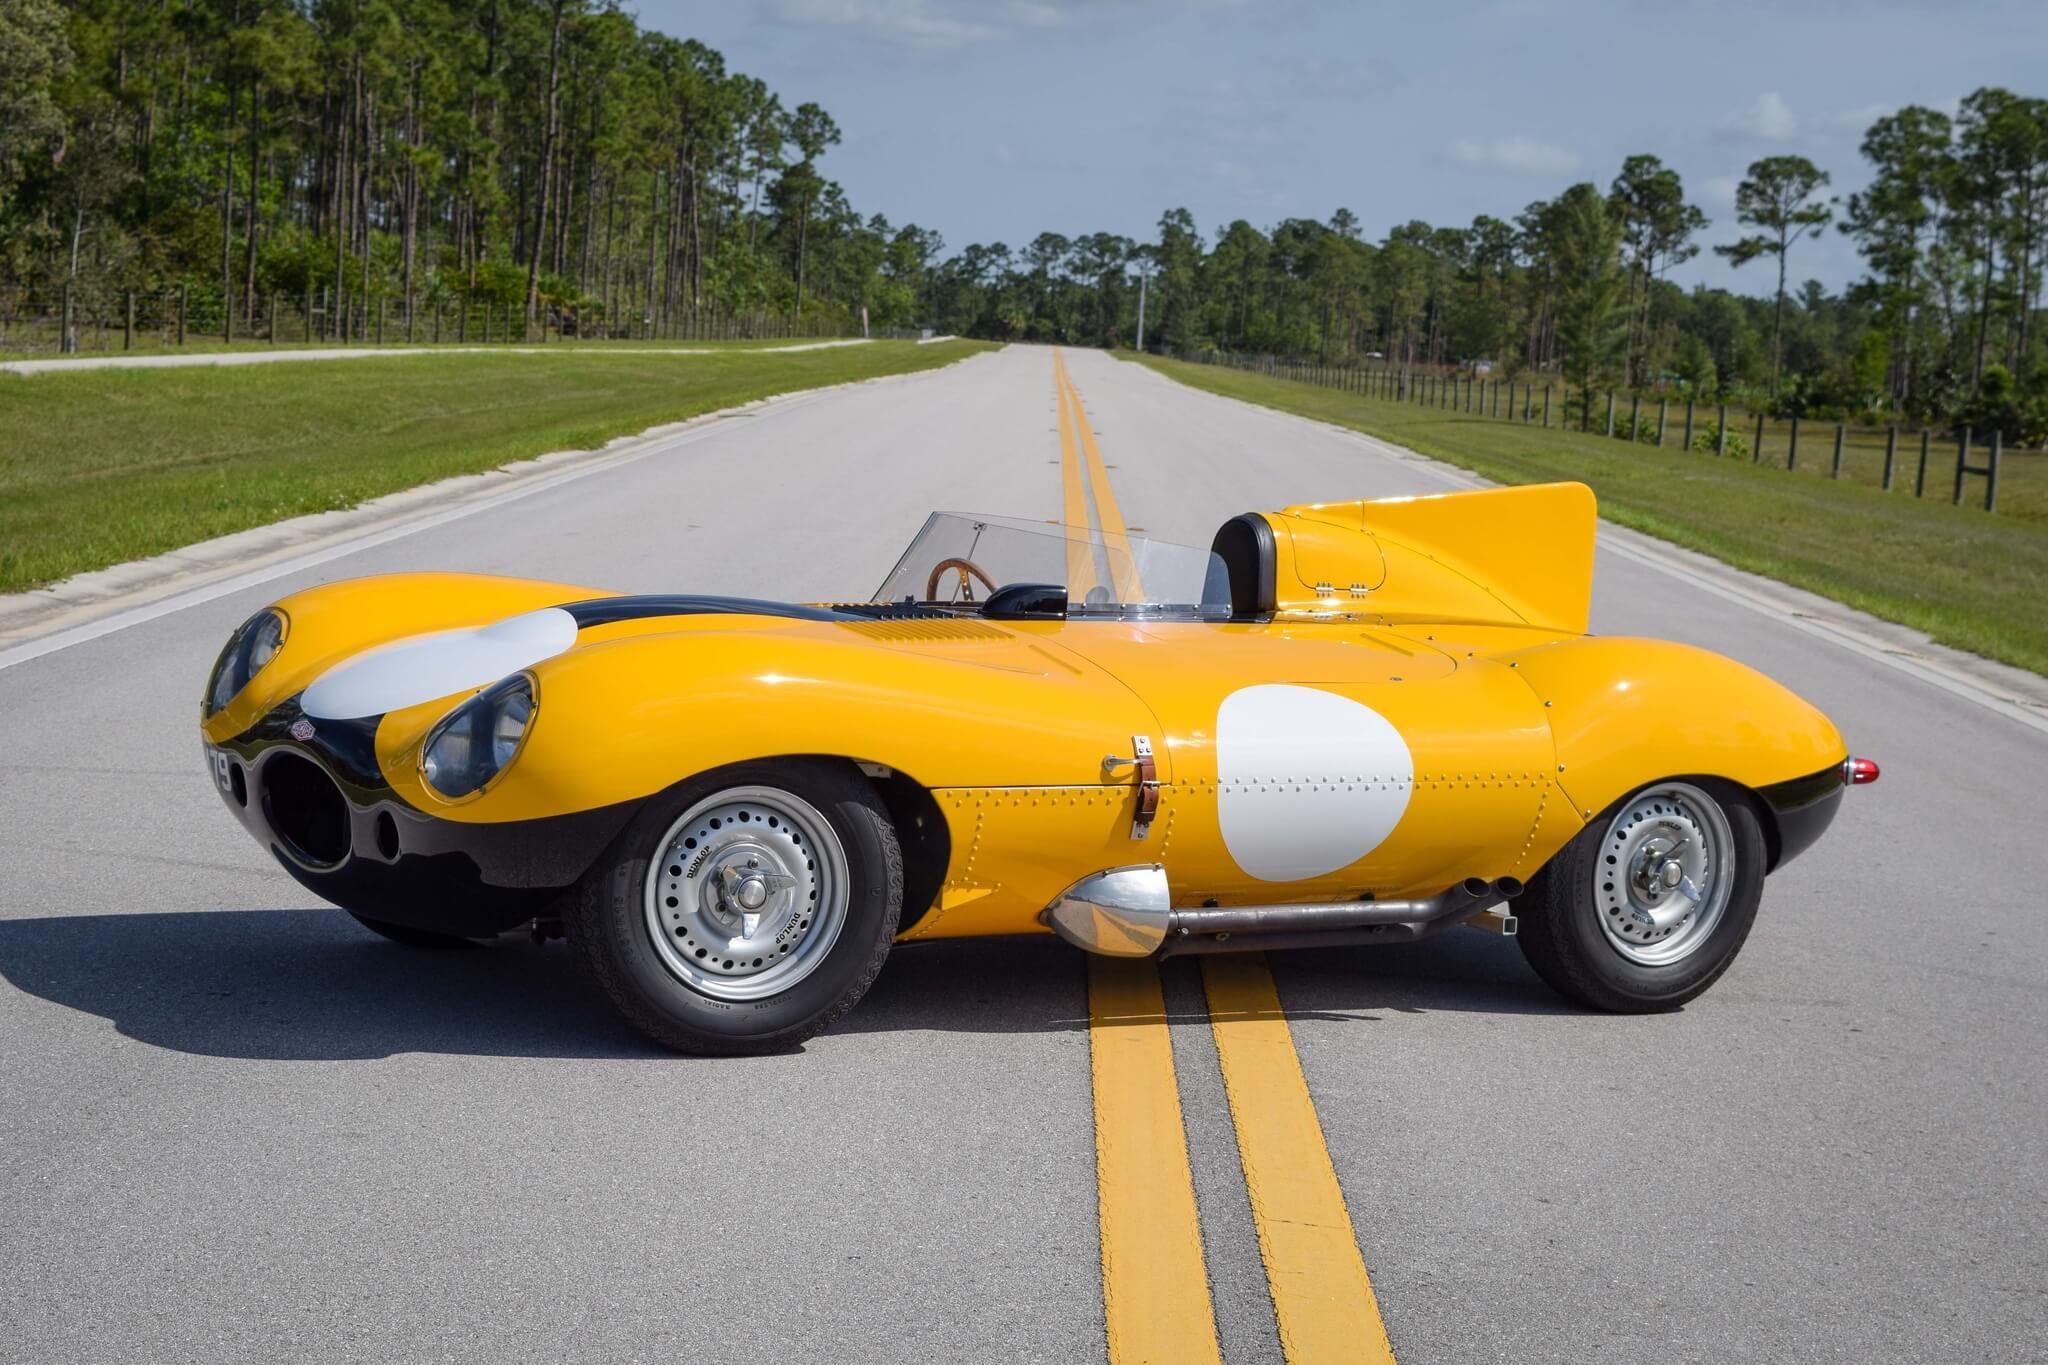 1956 D-Type Short Nose Alloy Re-Creation by Tempero | PCARMARKET